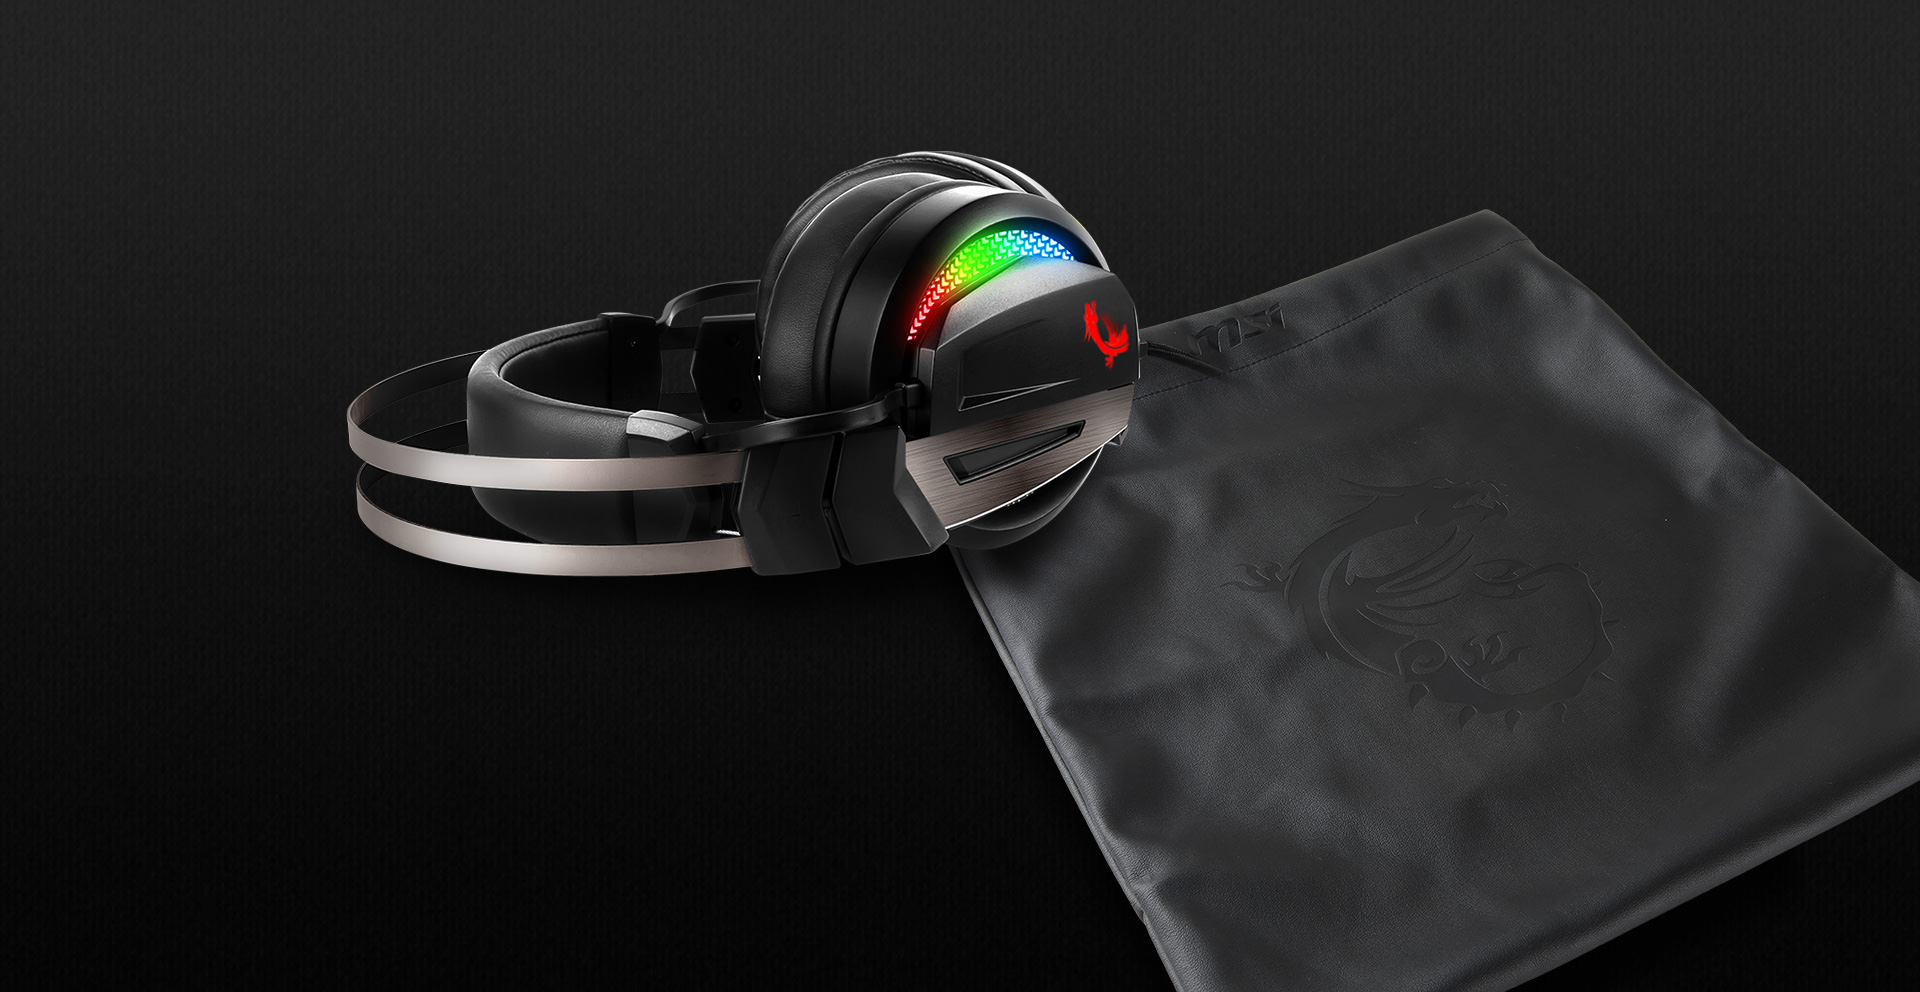 Immerse GH70 RGB Gaming Headset